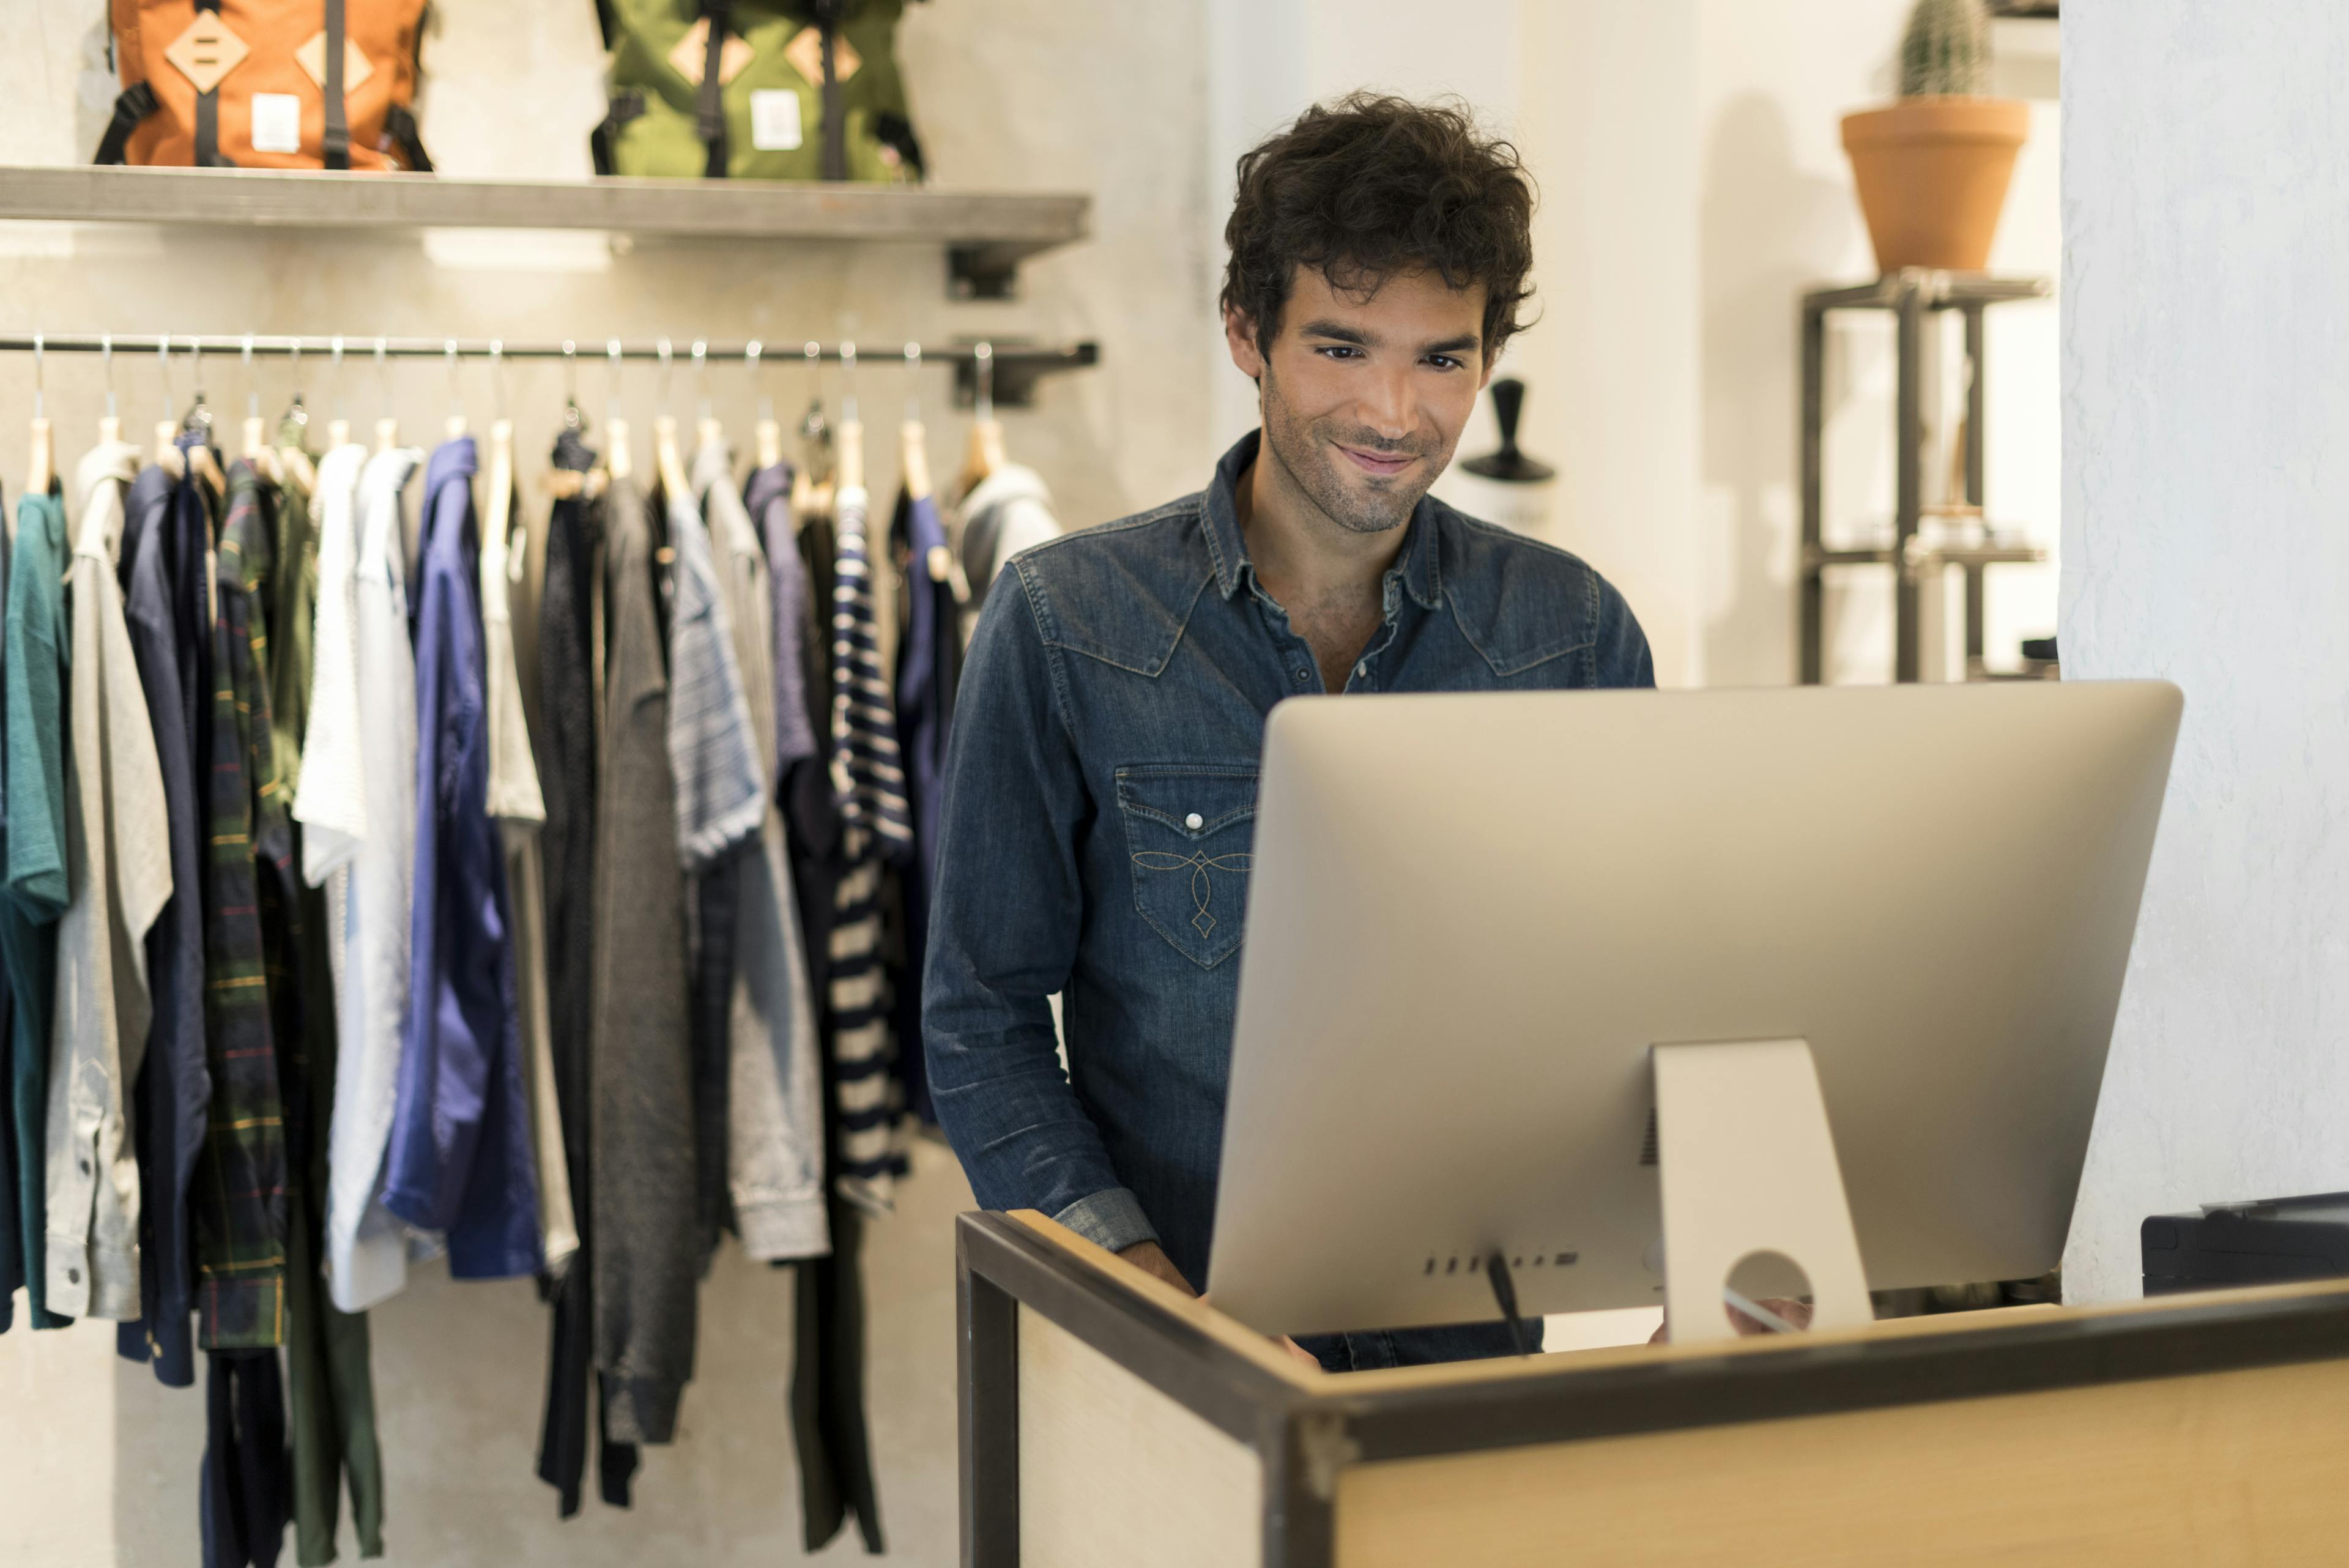 How Brick-And-Mortar Retailers Can Achieve Personalization